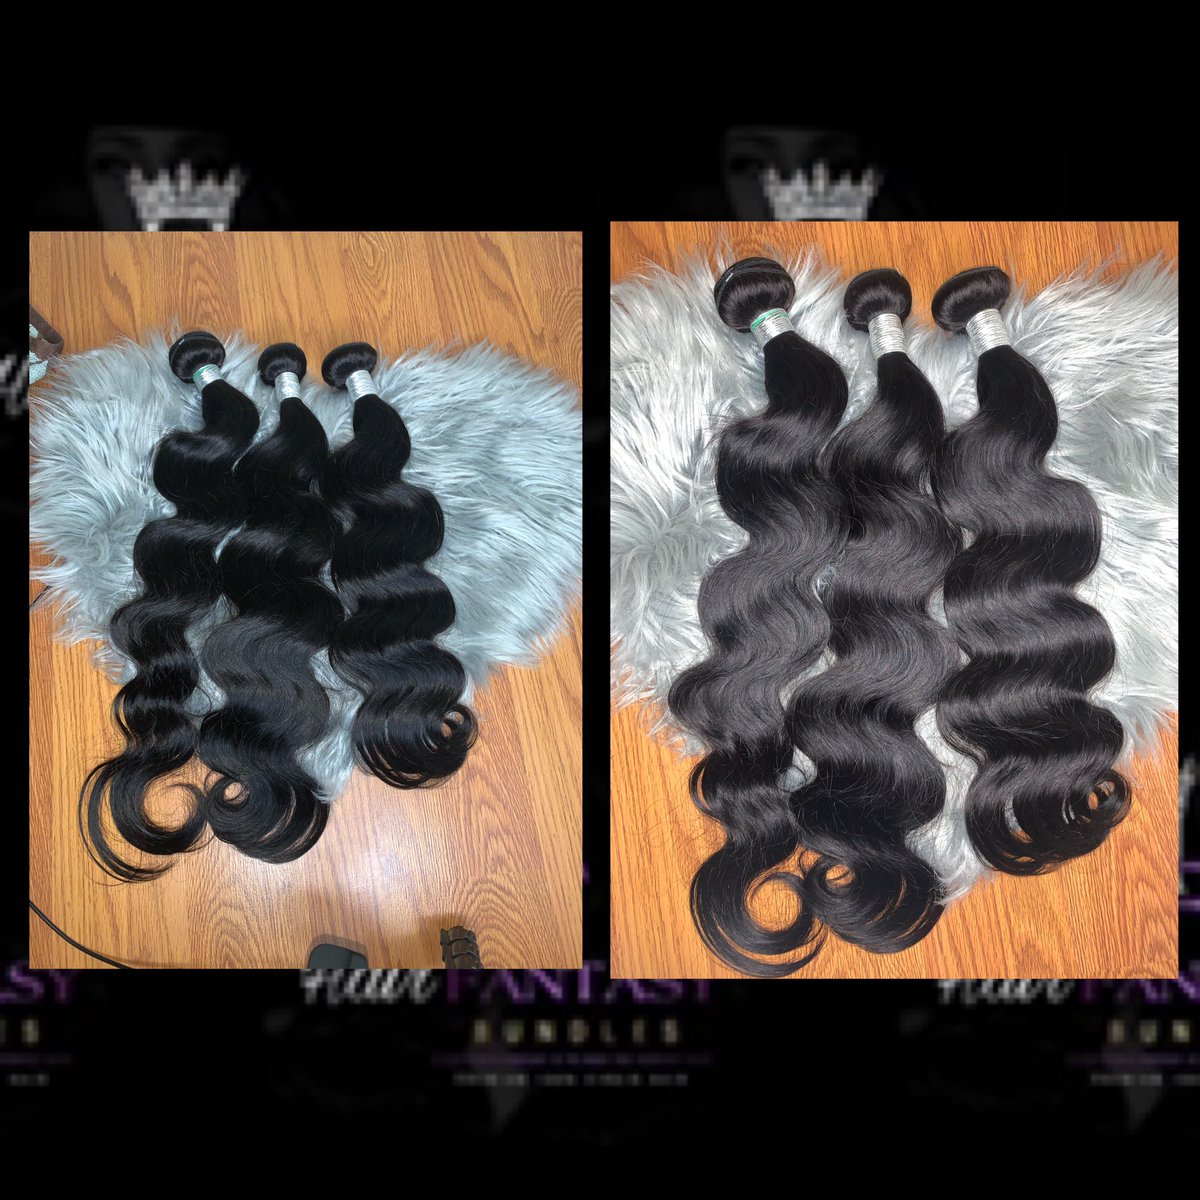 It’s the Quality for me🤩Shop our Deep wave💕 , Silky Straight💜 and Body wave bundles ❤️Online Today🛍#Hairfantasybundles #hdlace #frontals #shop #BlackOwnedBusiness #bodywavebundles #straightbundles